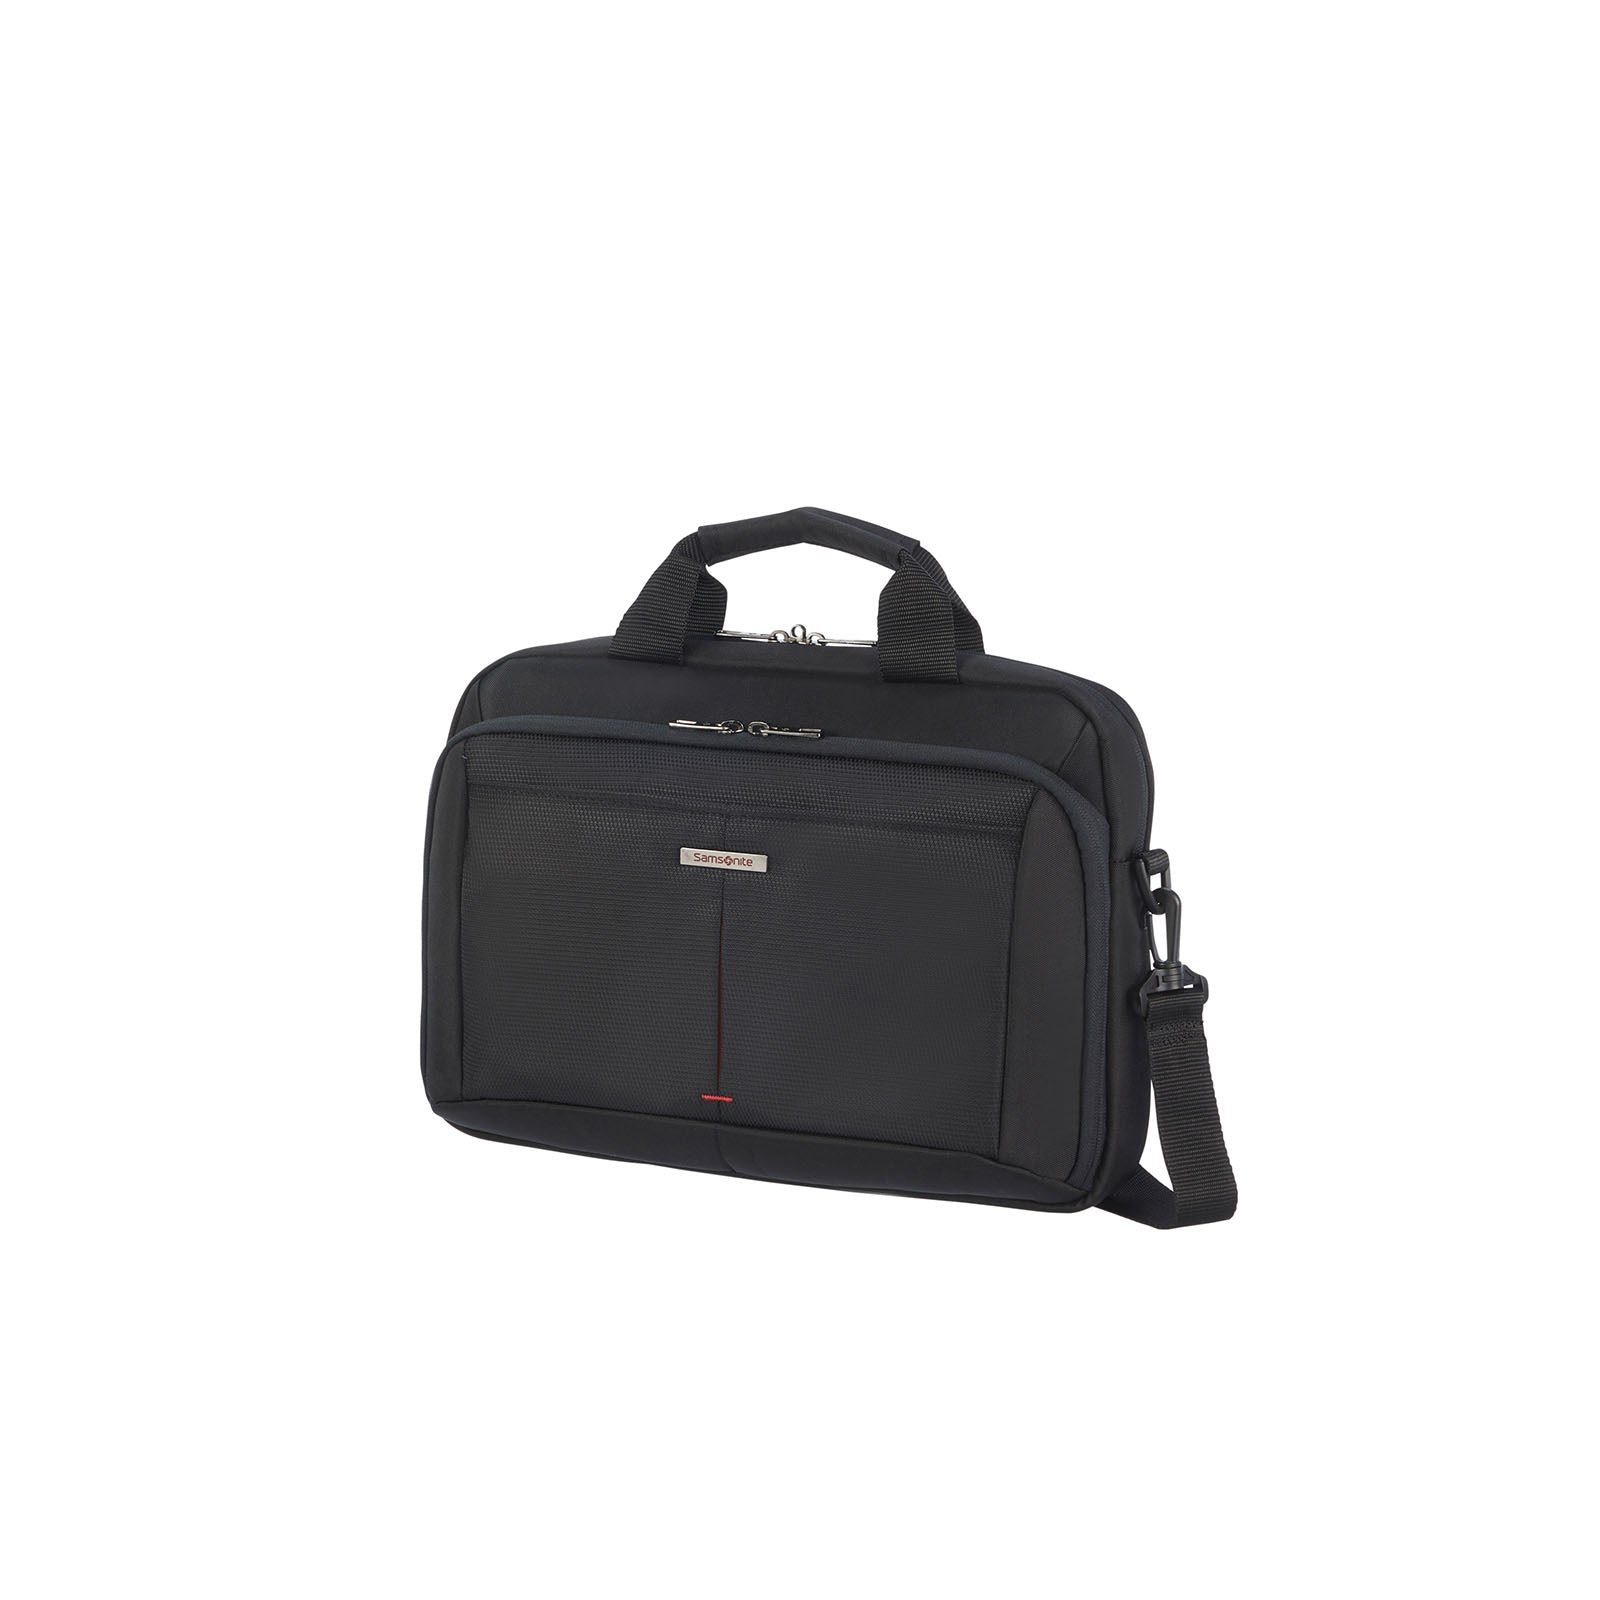 Samsonite-Guardit-2-13-Inch-Laptop-Briefcase-Front-Angle